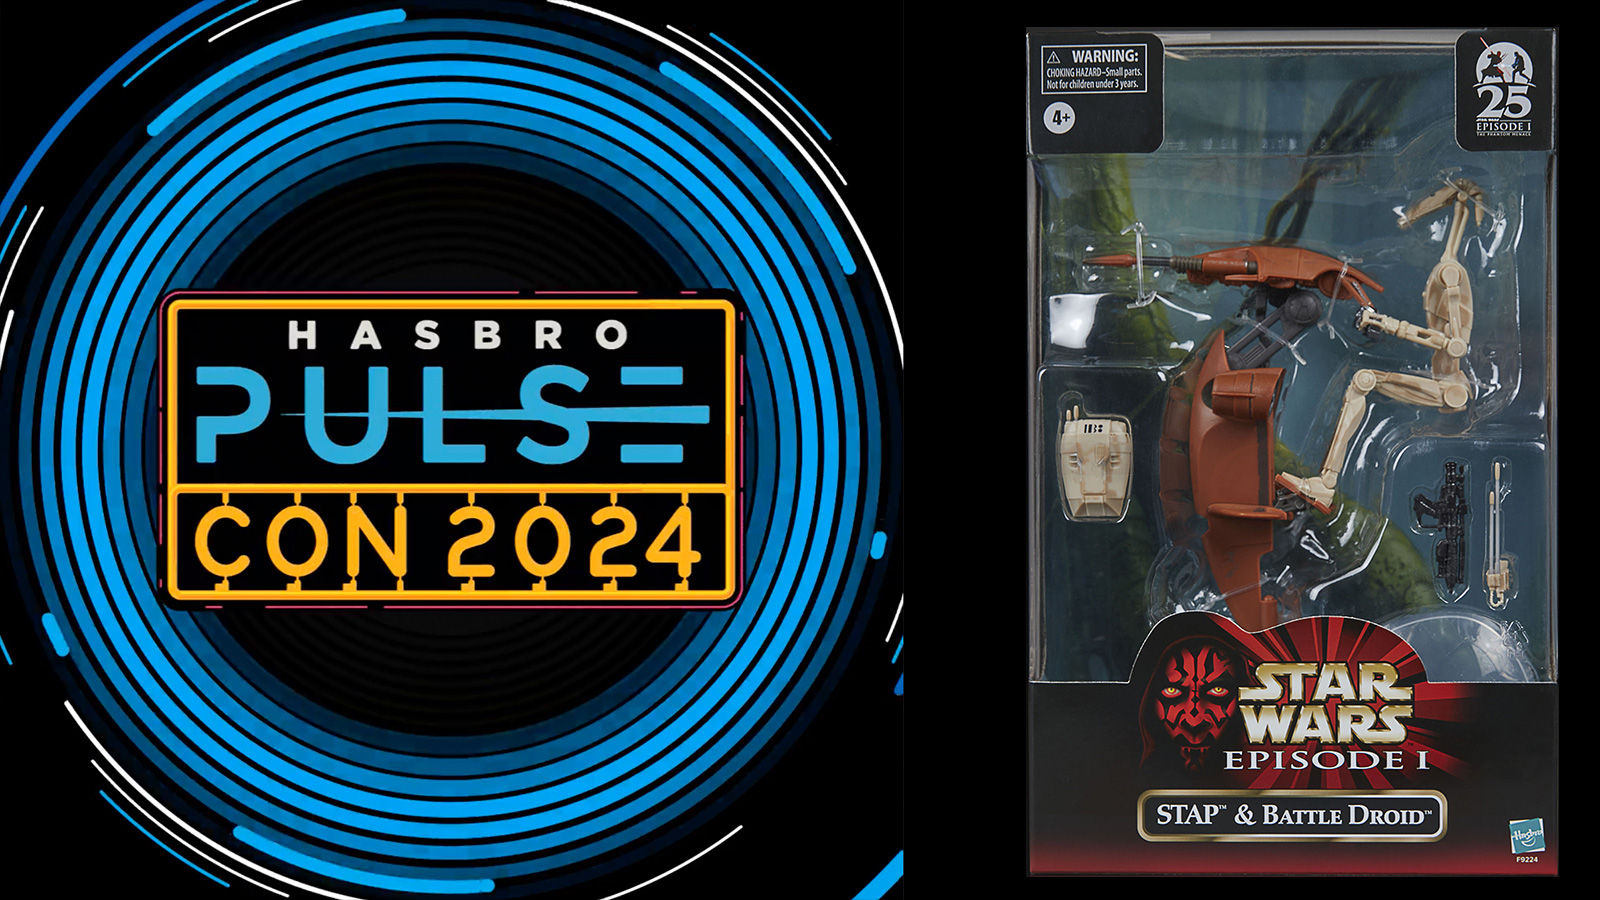 Hasbro Pulse Con 2024 Will Take Place On September 13, 2024